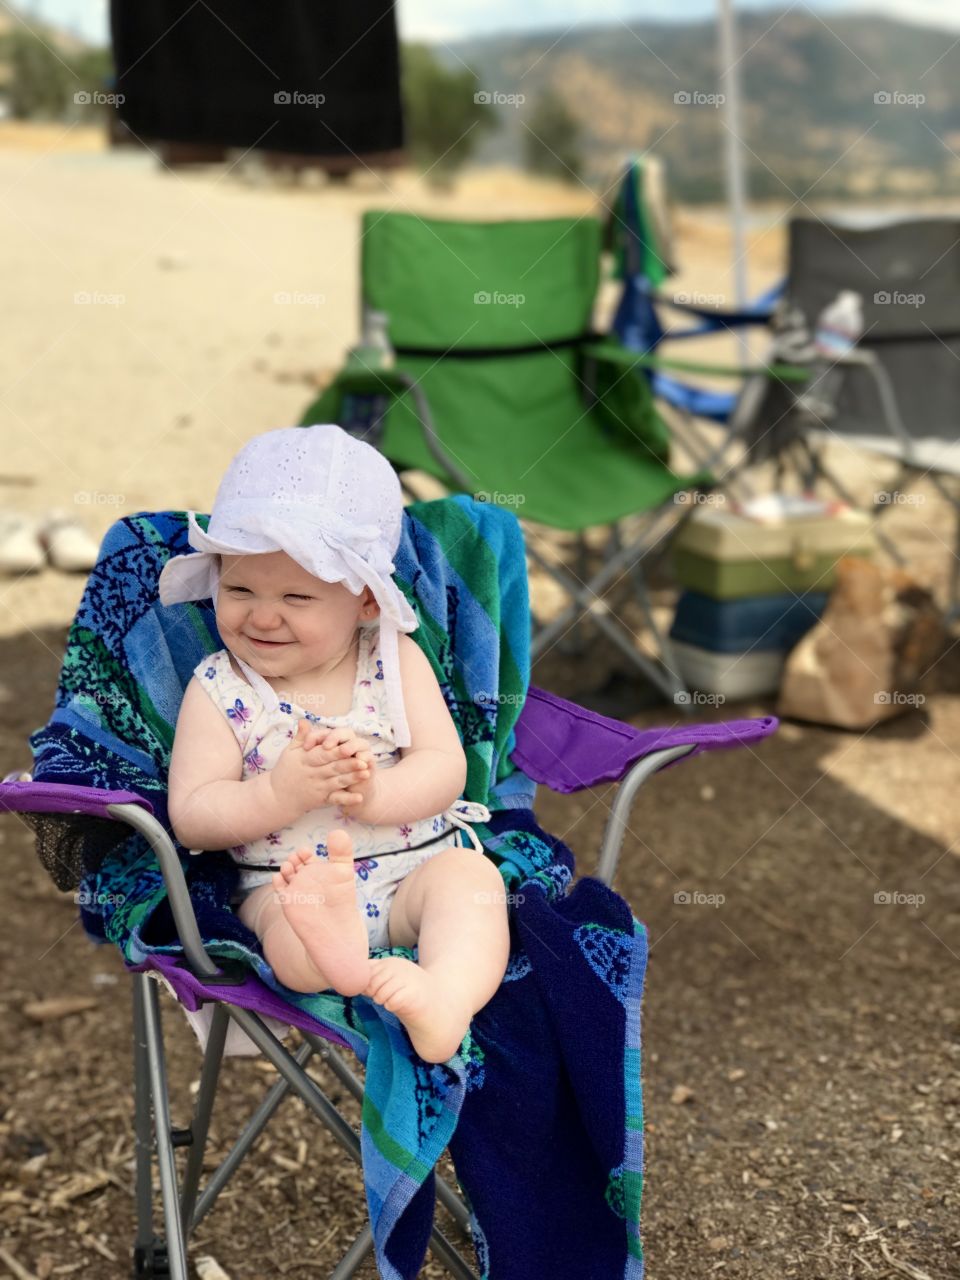 A little fun in the sun. Camping, a dip in the lake and some sweet baby laughs! 